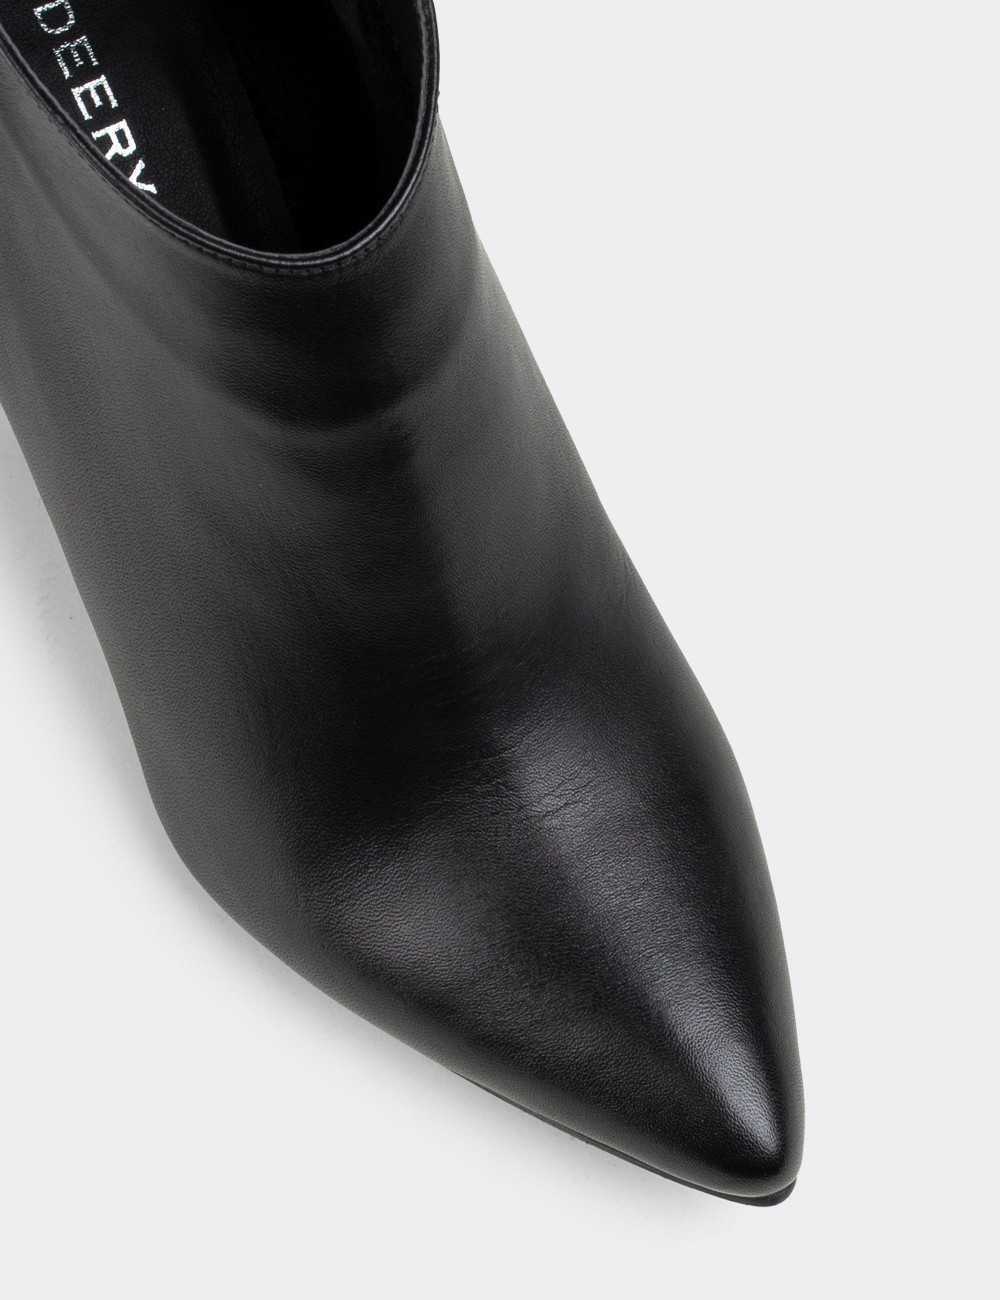 Black  Leather Boots - 02043ZSYHN02